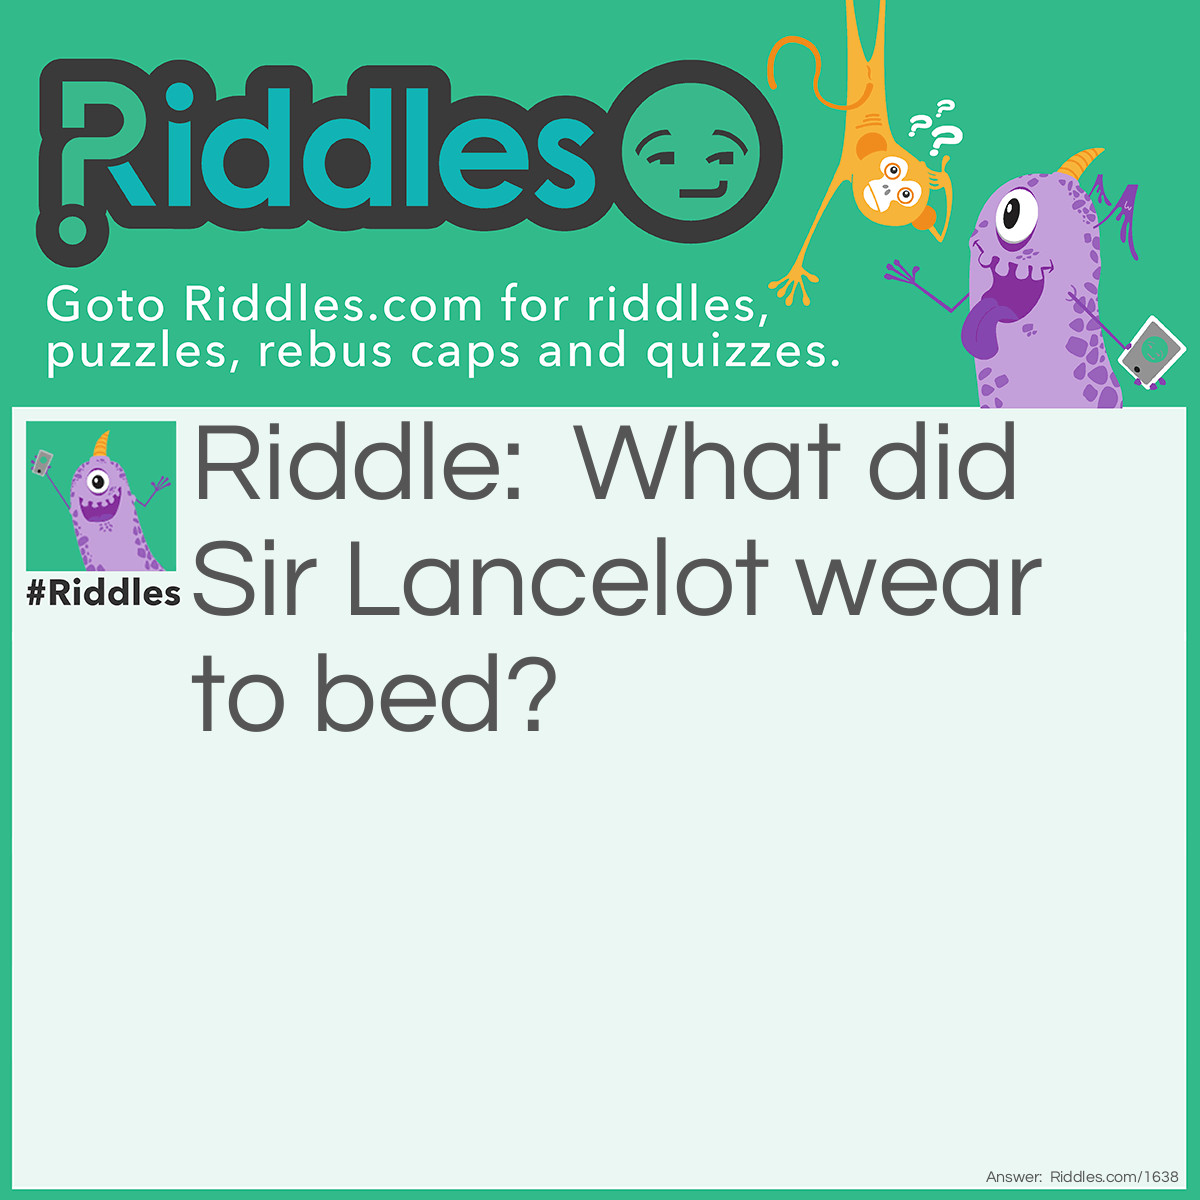 Riddle: What did Sir Lancelot wear to bed? Answer: A knight gown!